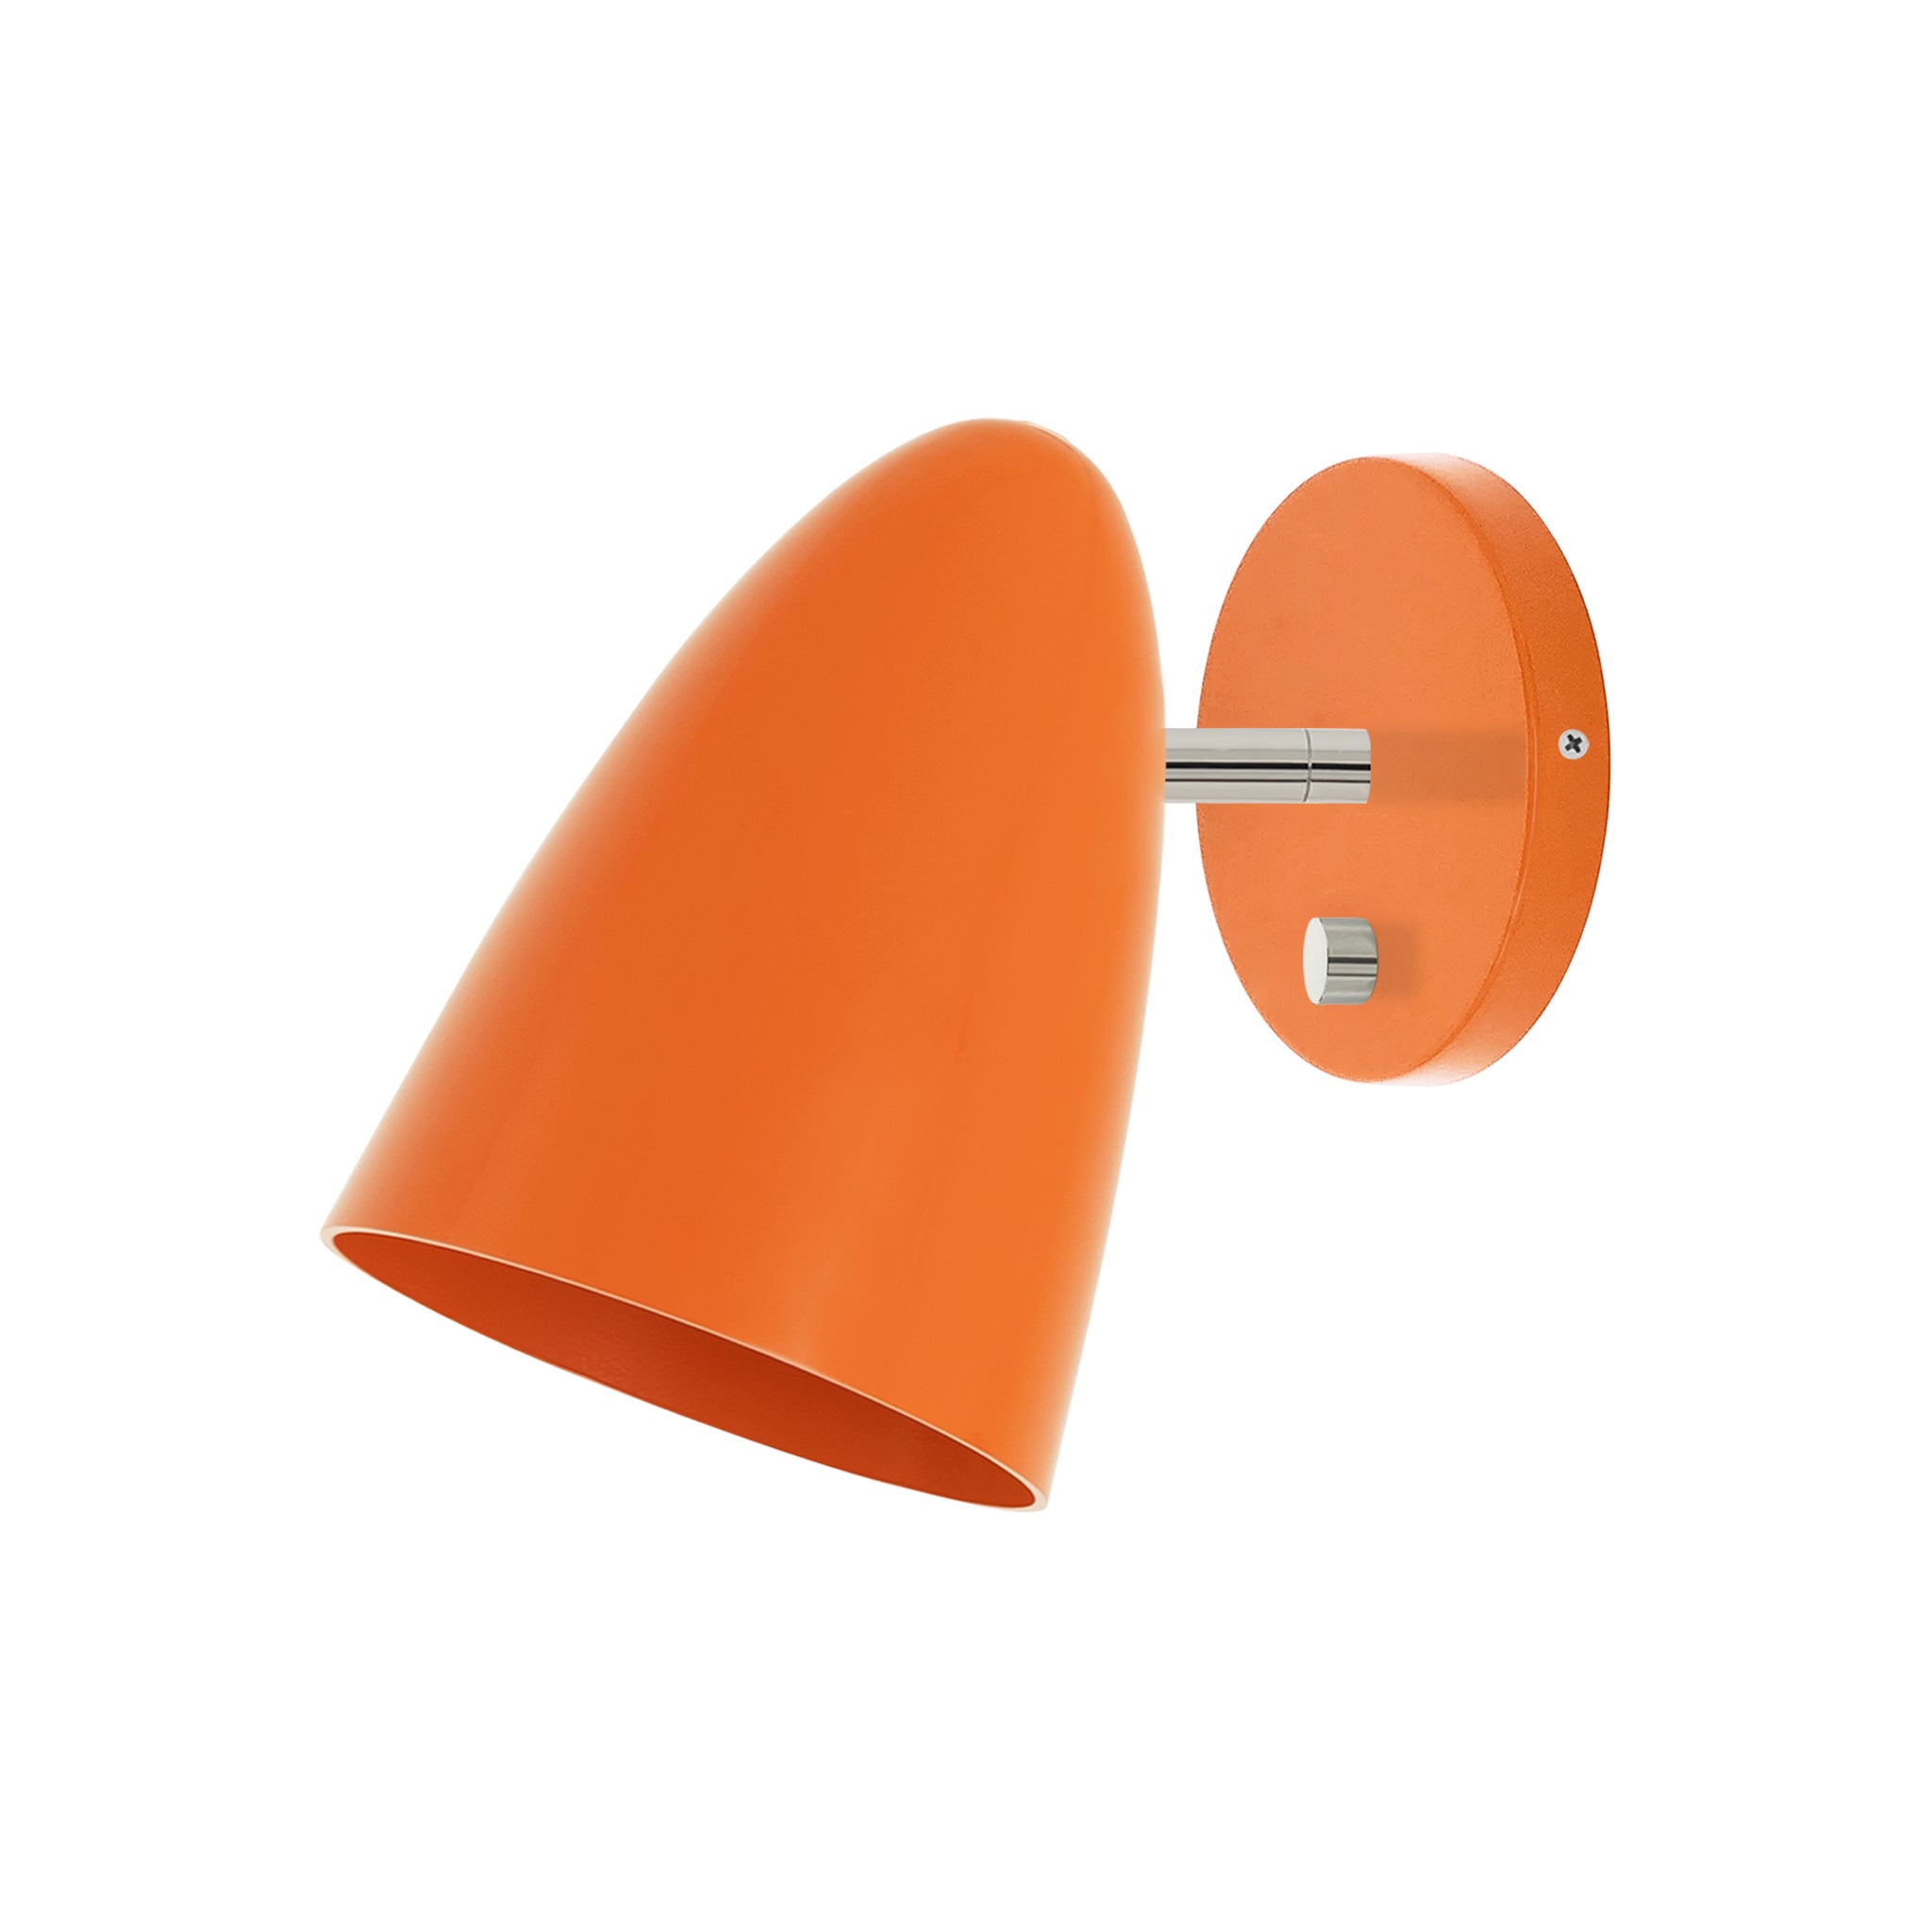 Nickel and orange color Boom sconce no arm Dutton Brown lighting